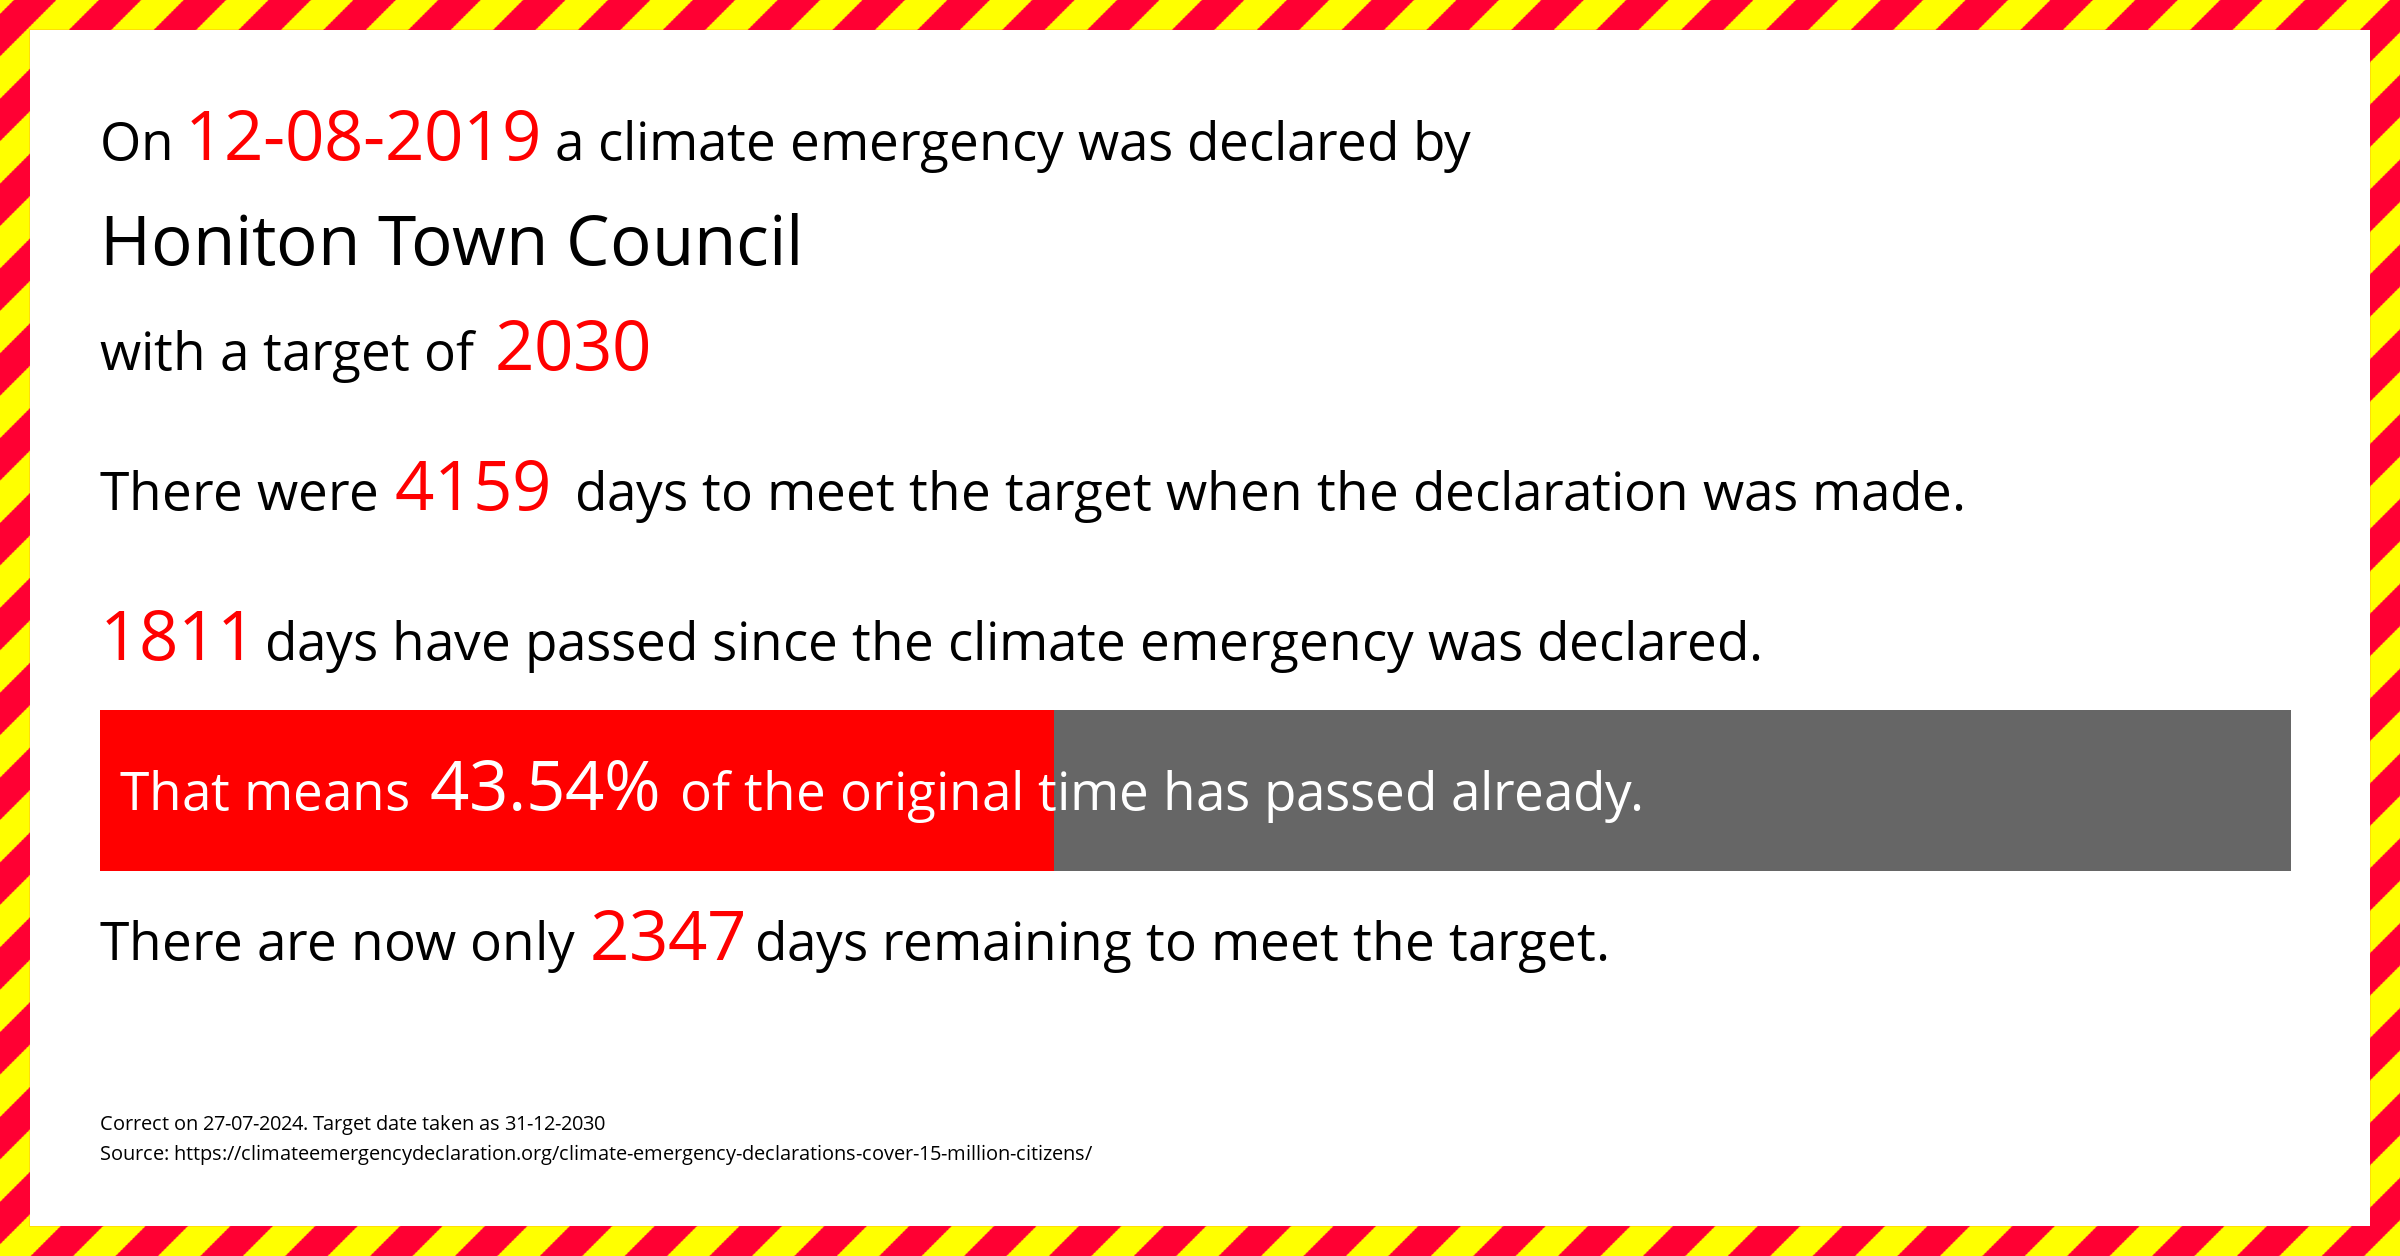 Honiton Town Council declared a Climate emergency on Monday 12th August 2019, with a target of 2030.